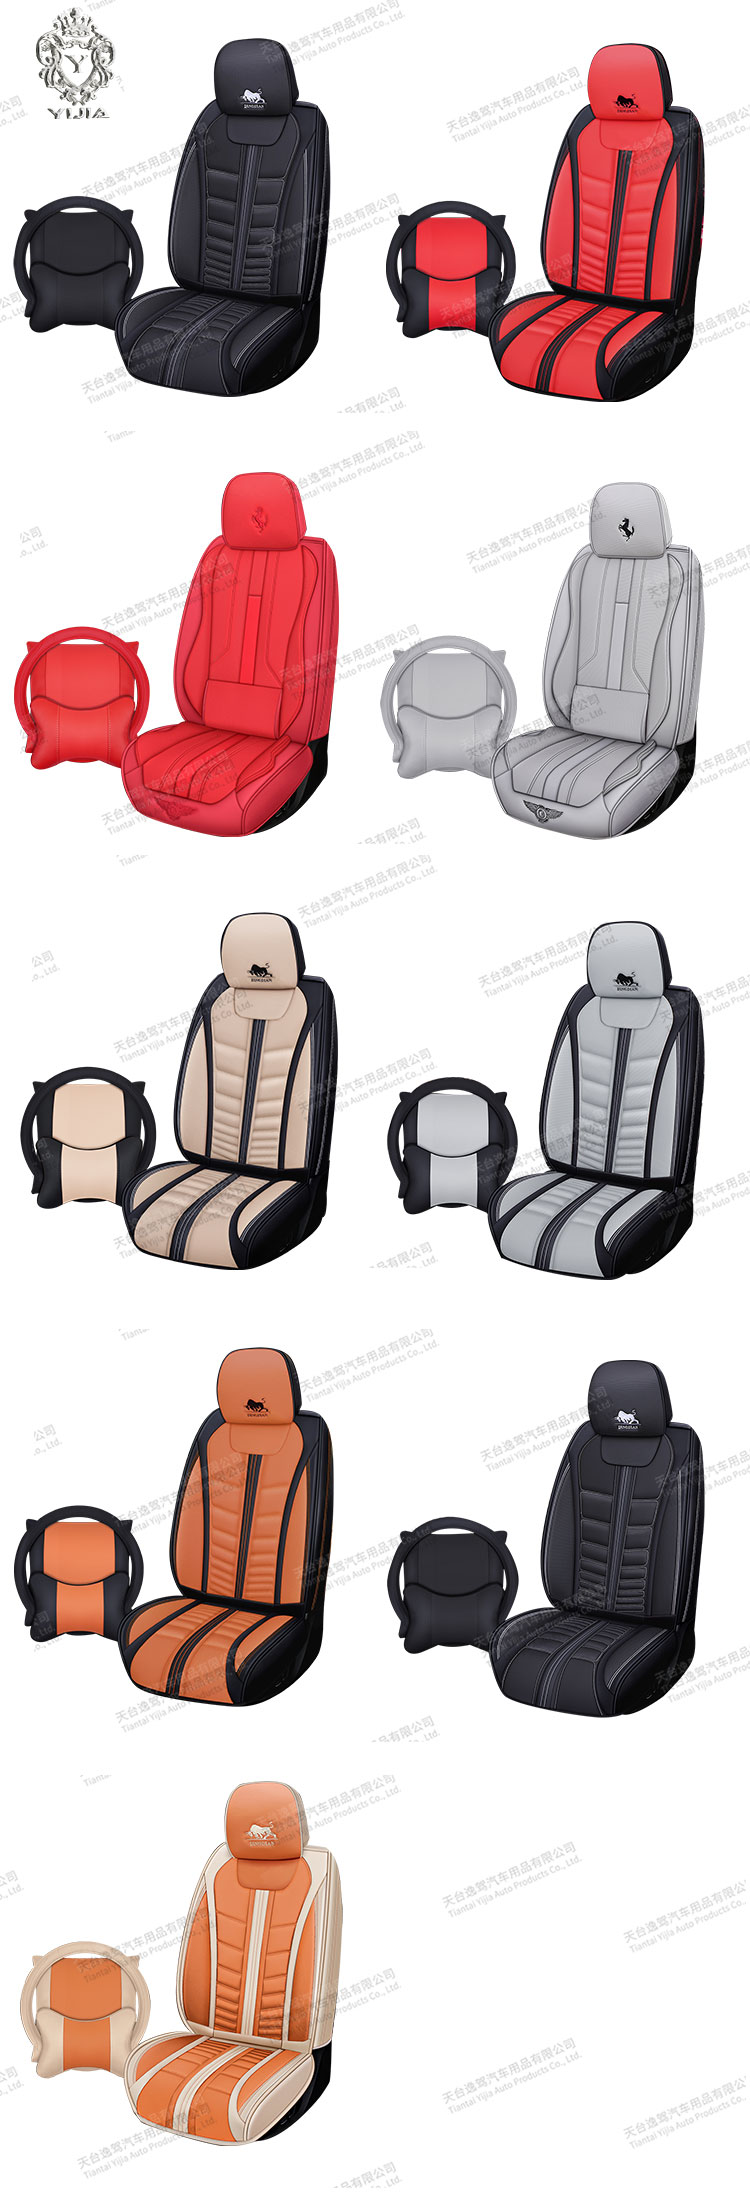 Luxury Leather Seat Covers DD-2020